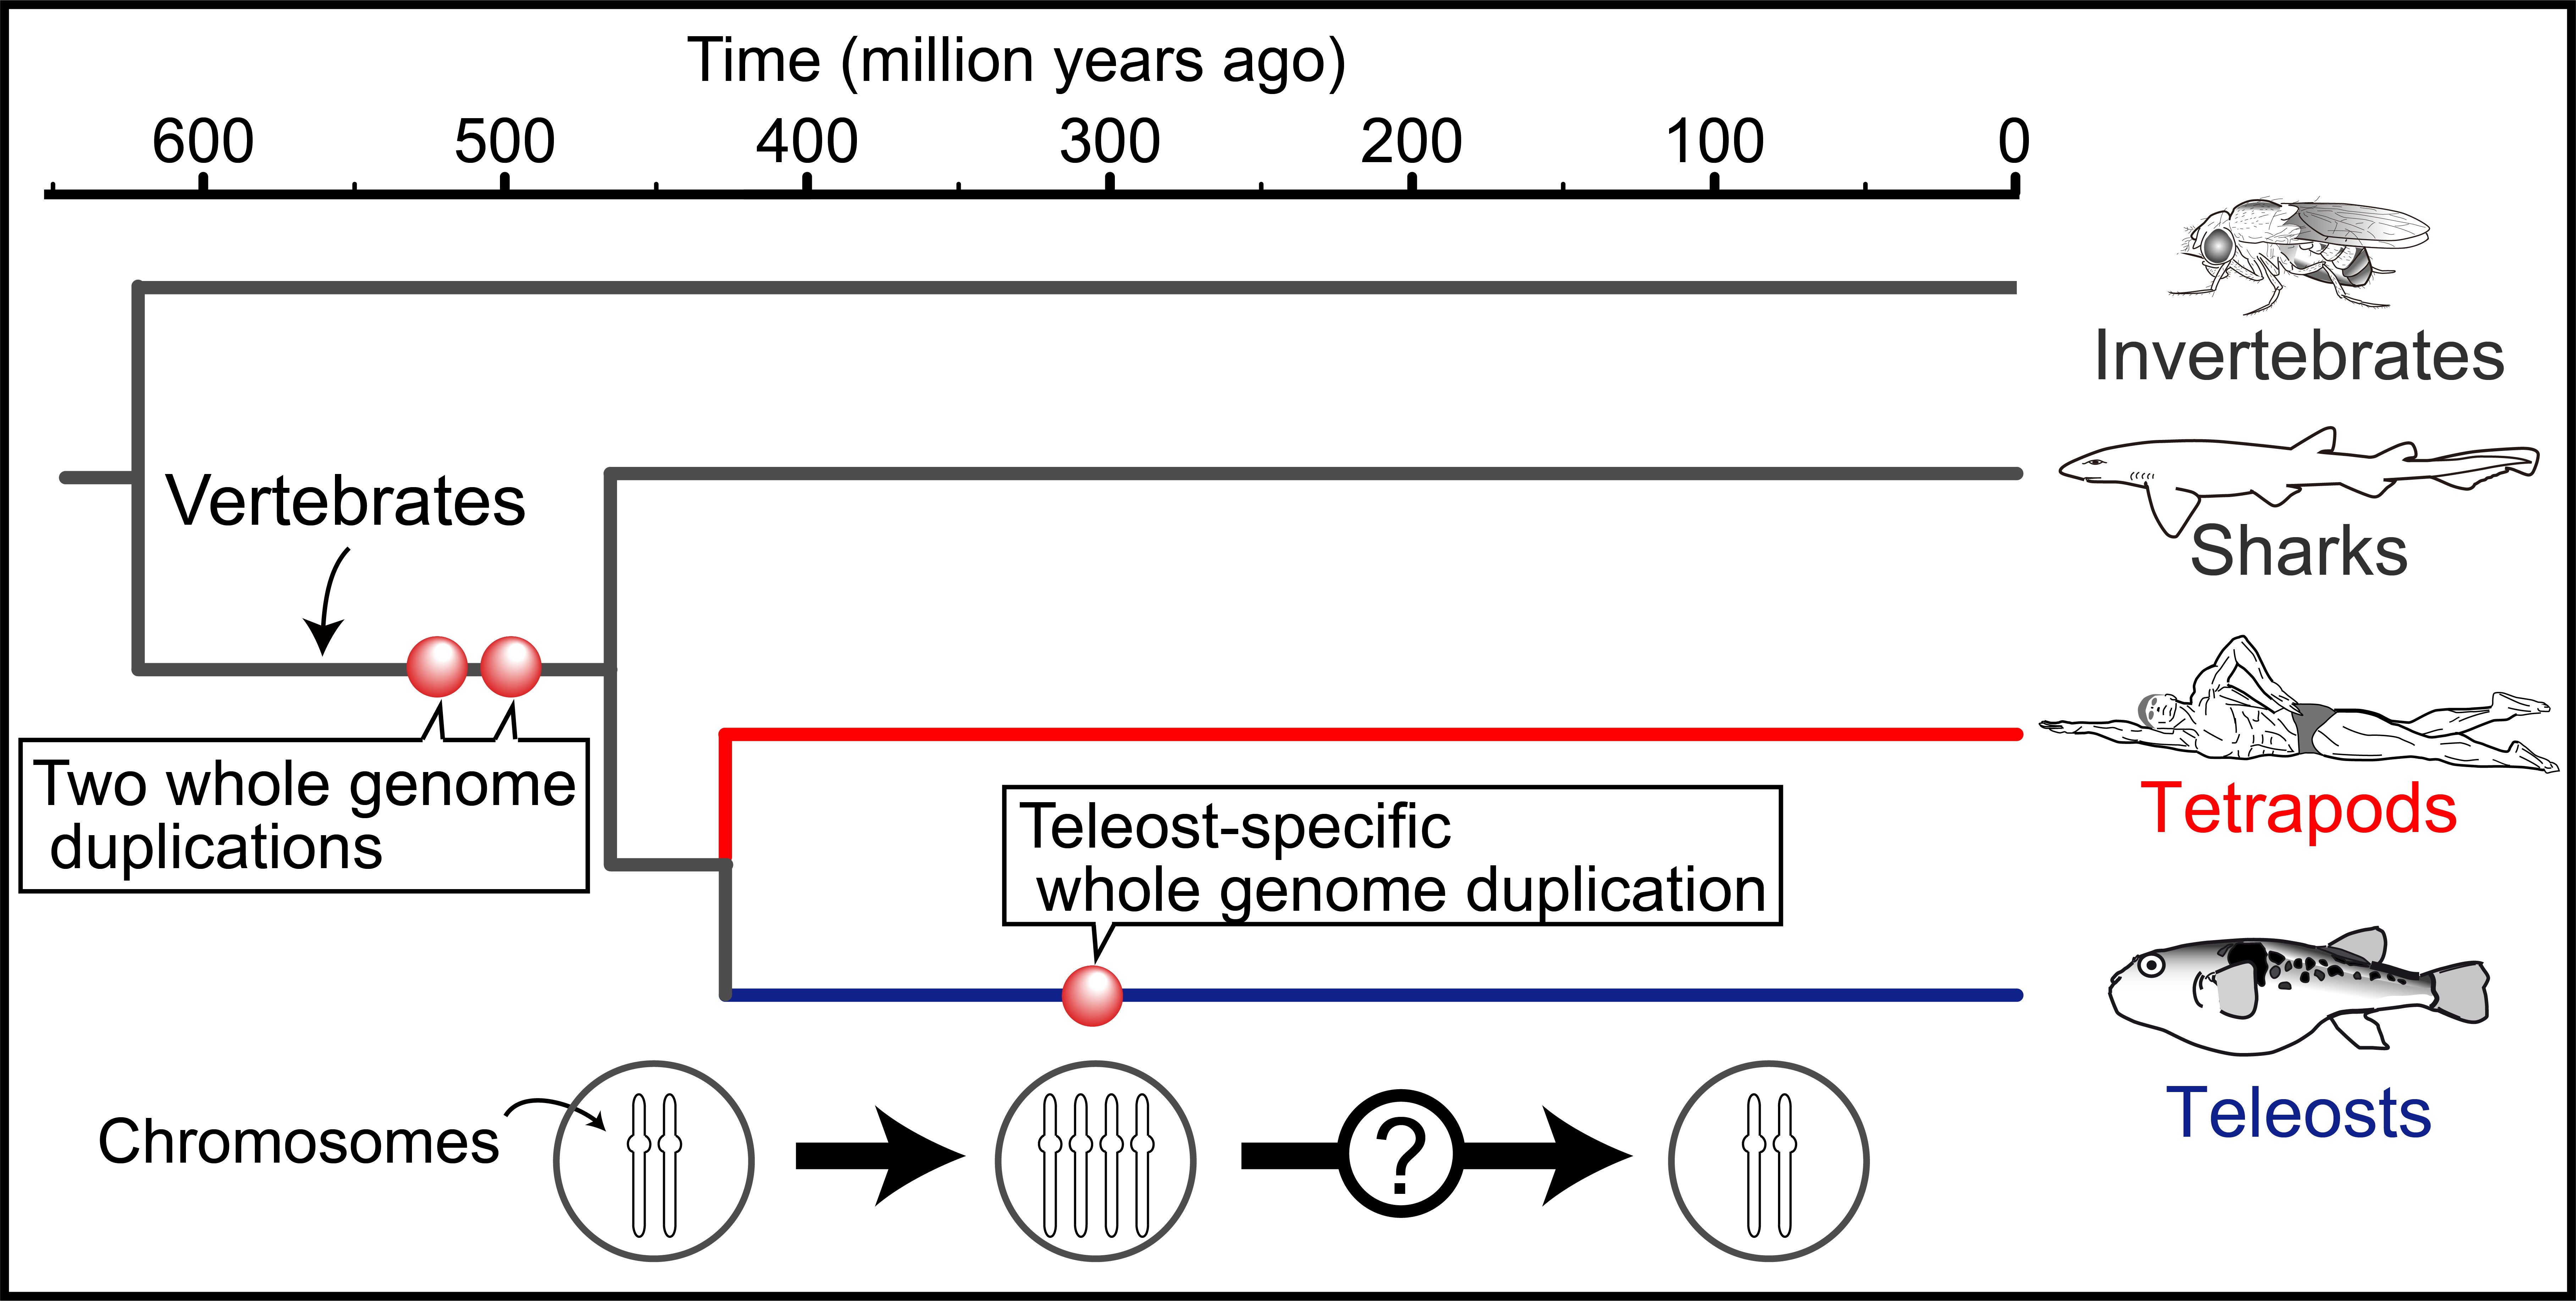 Evolution of major vertebrates and whole genome duplication events